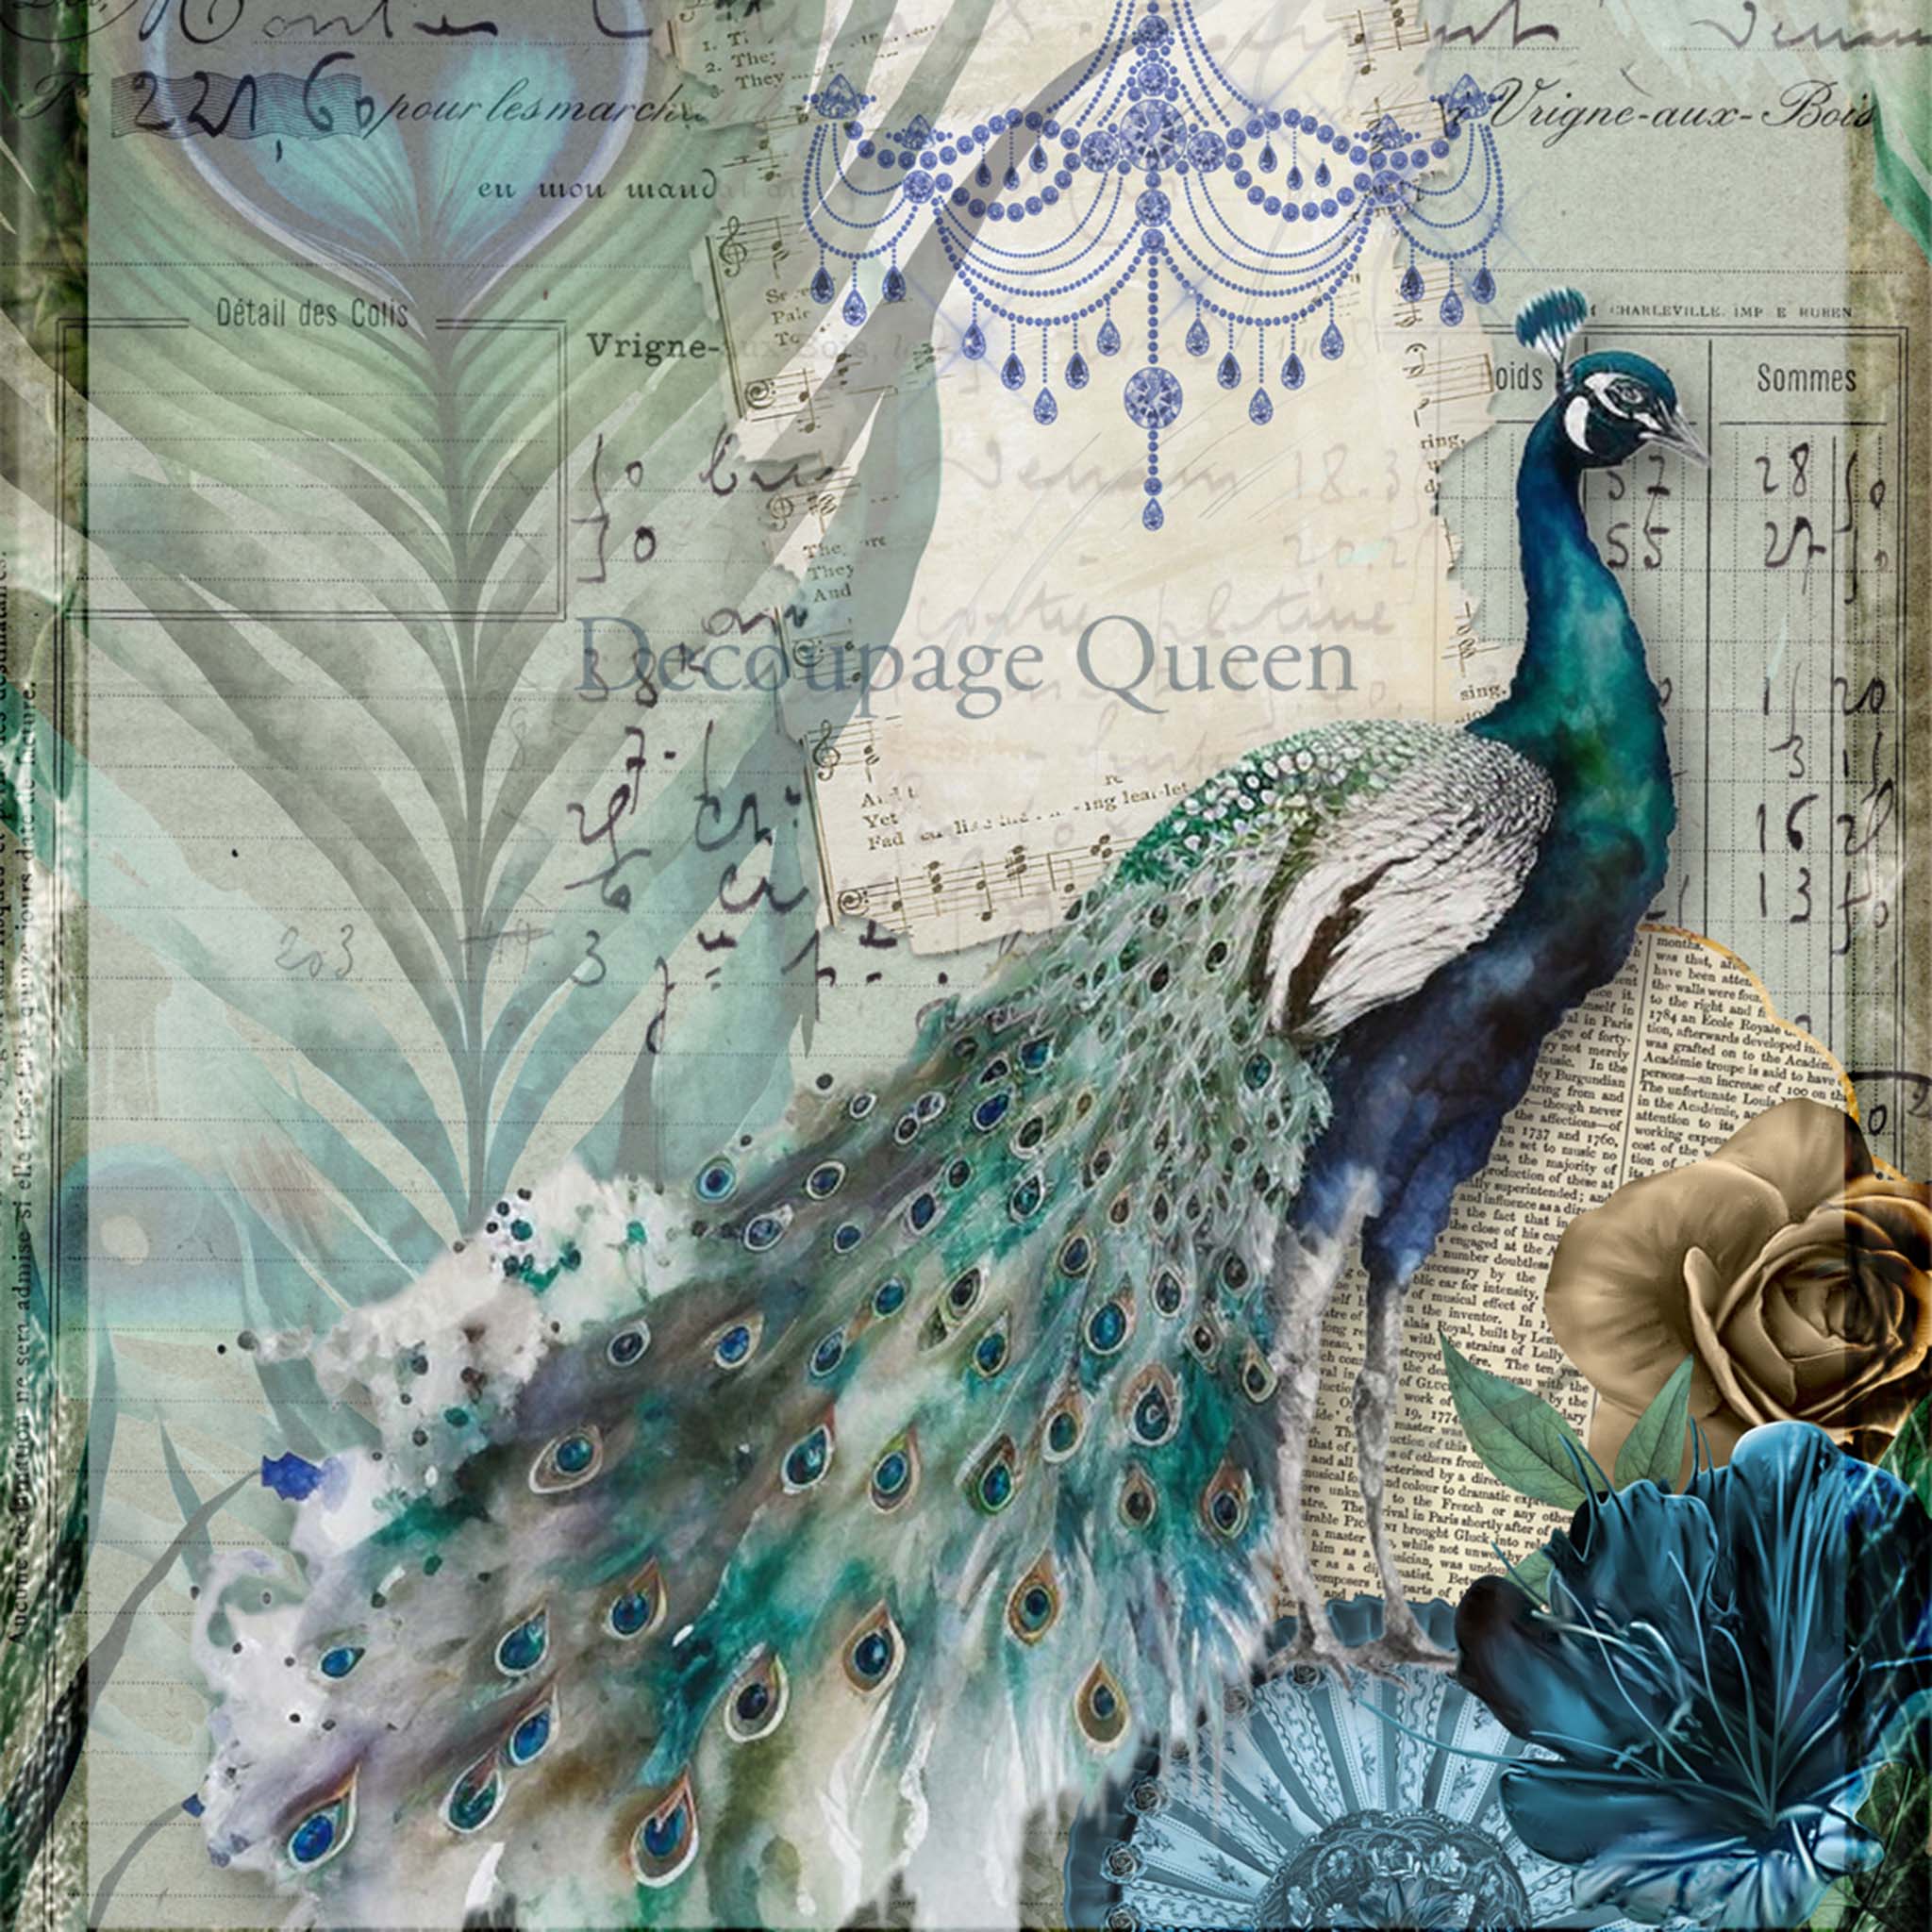 Close-up of an A4 rice paper design that features a design of vintage documents adorned with peacock feathers and vivid flowers while a peacock struts across the page.